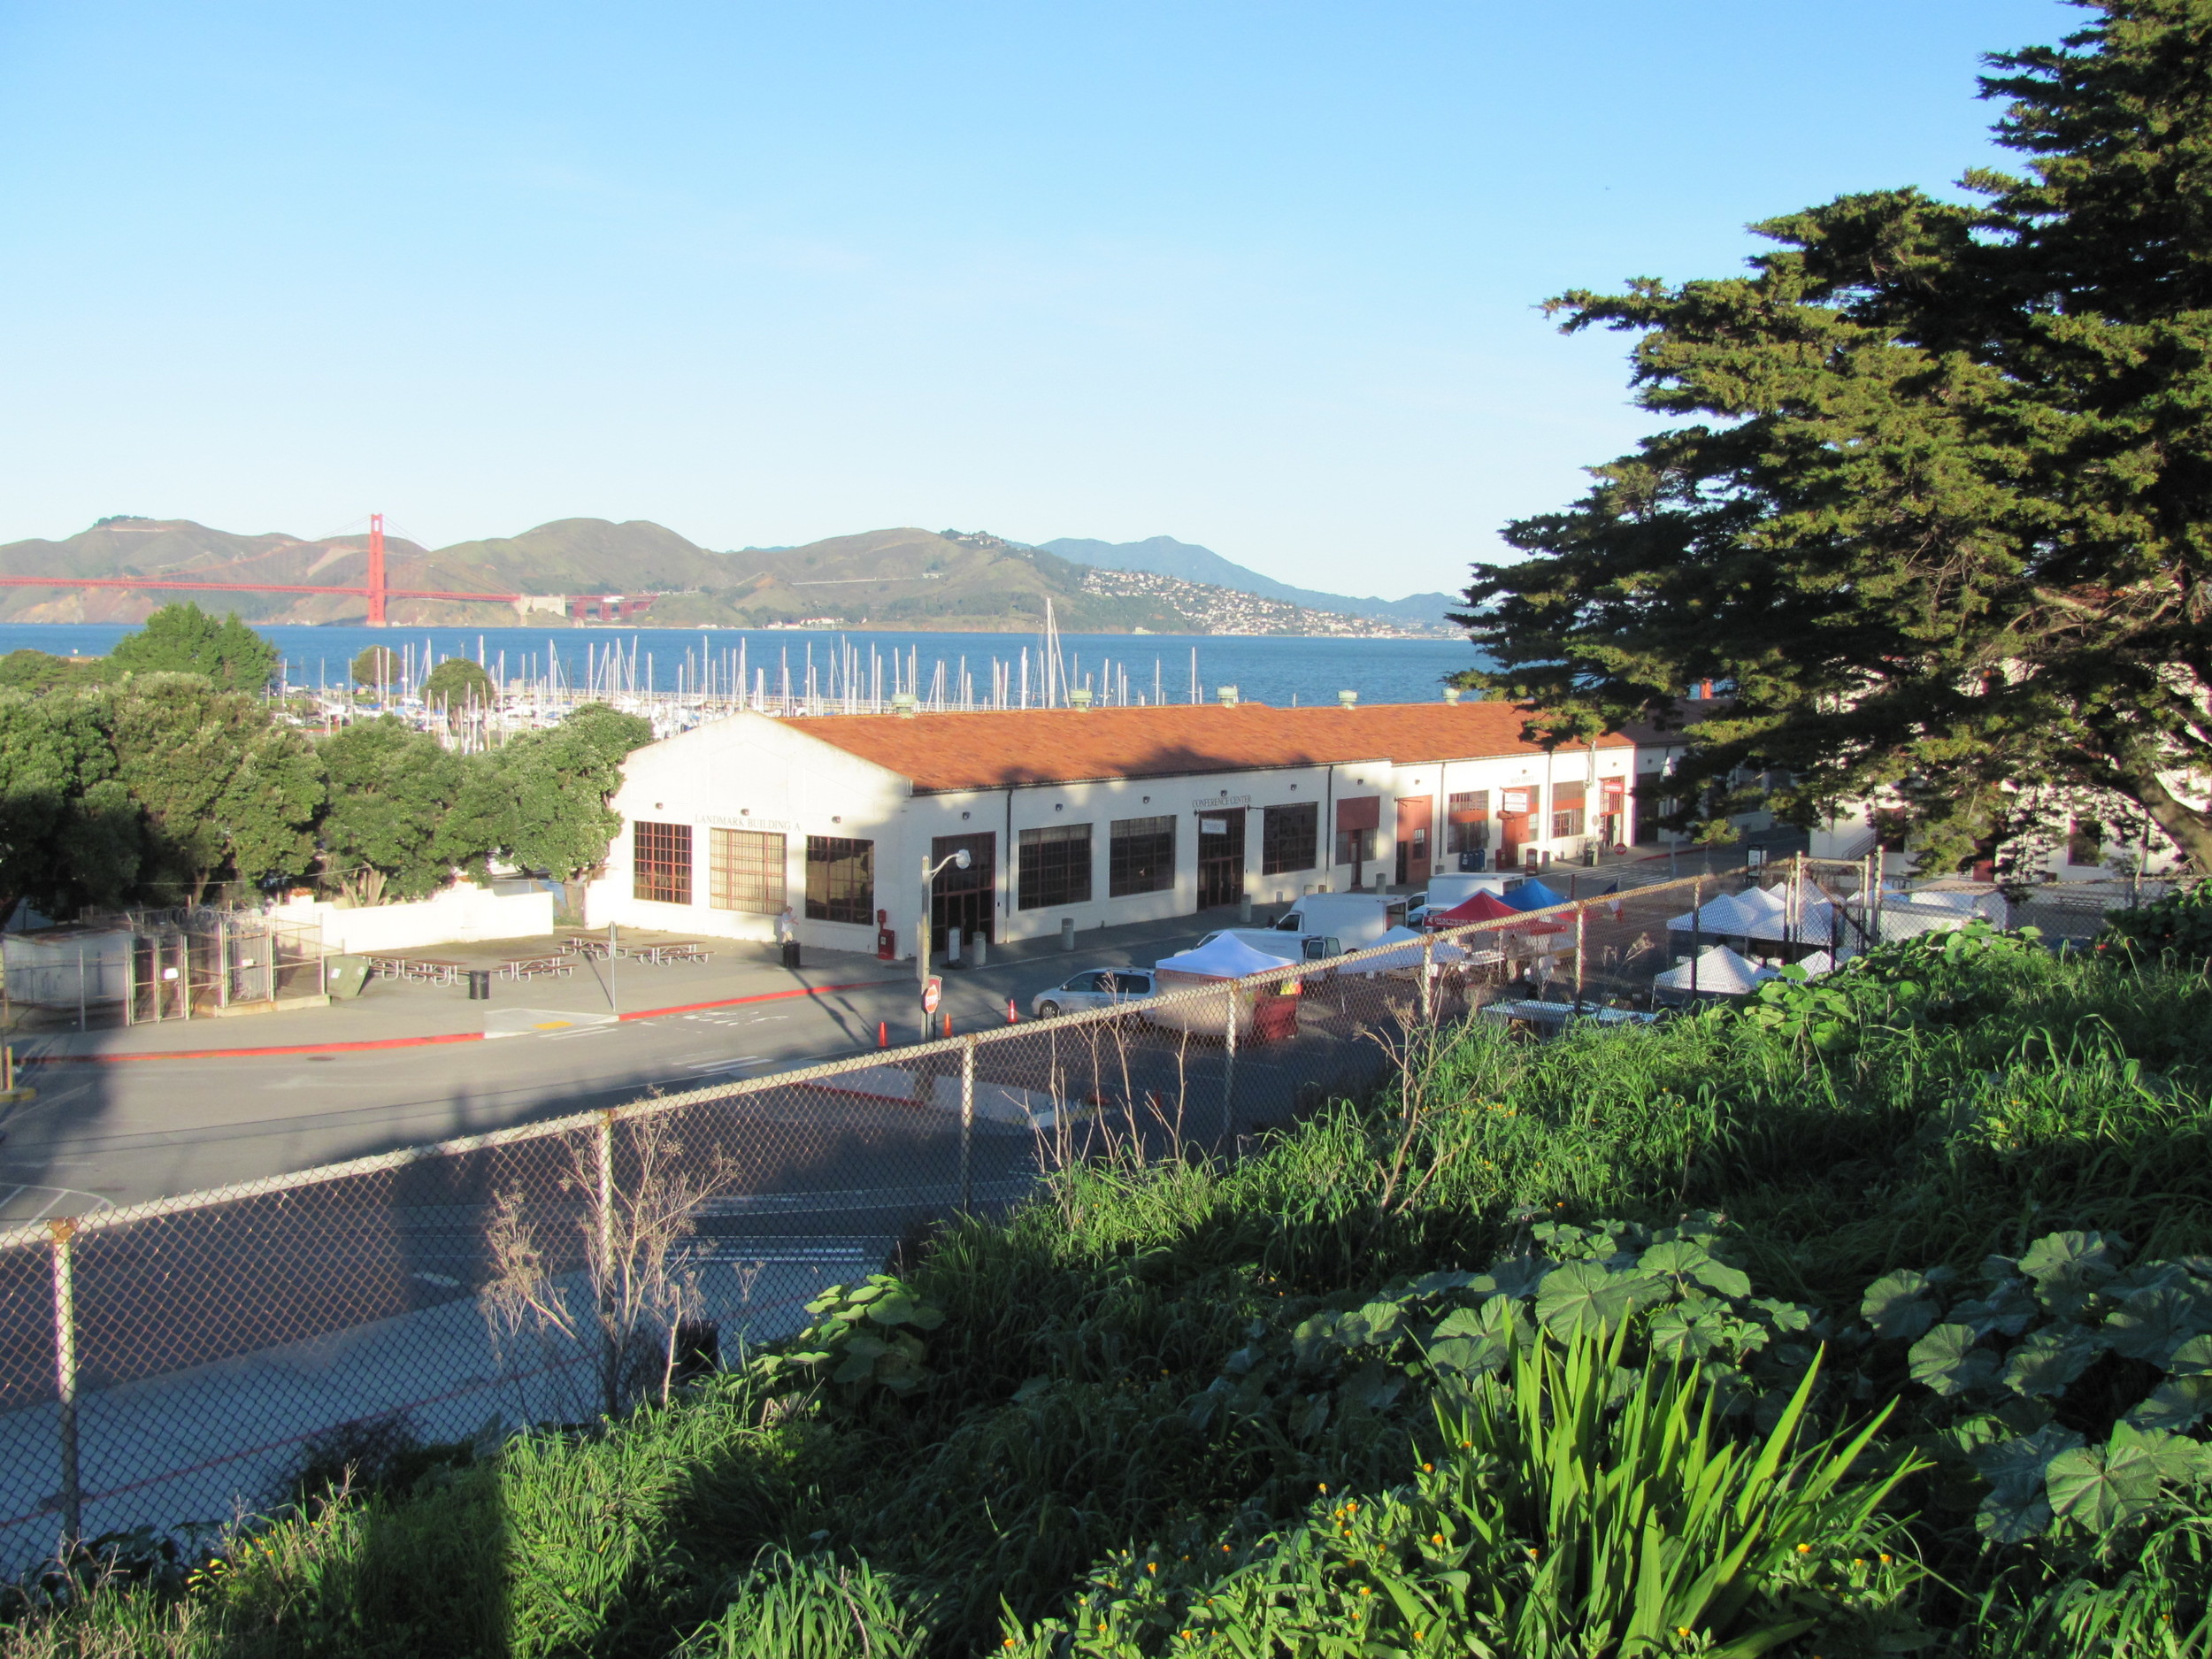 View from Fort Mason Center Farmers' Market of the Golden Gate